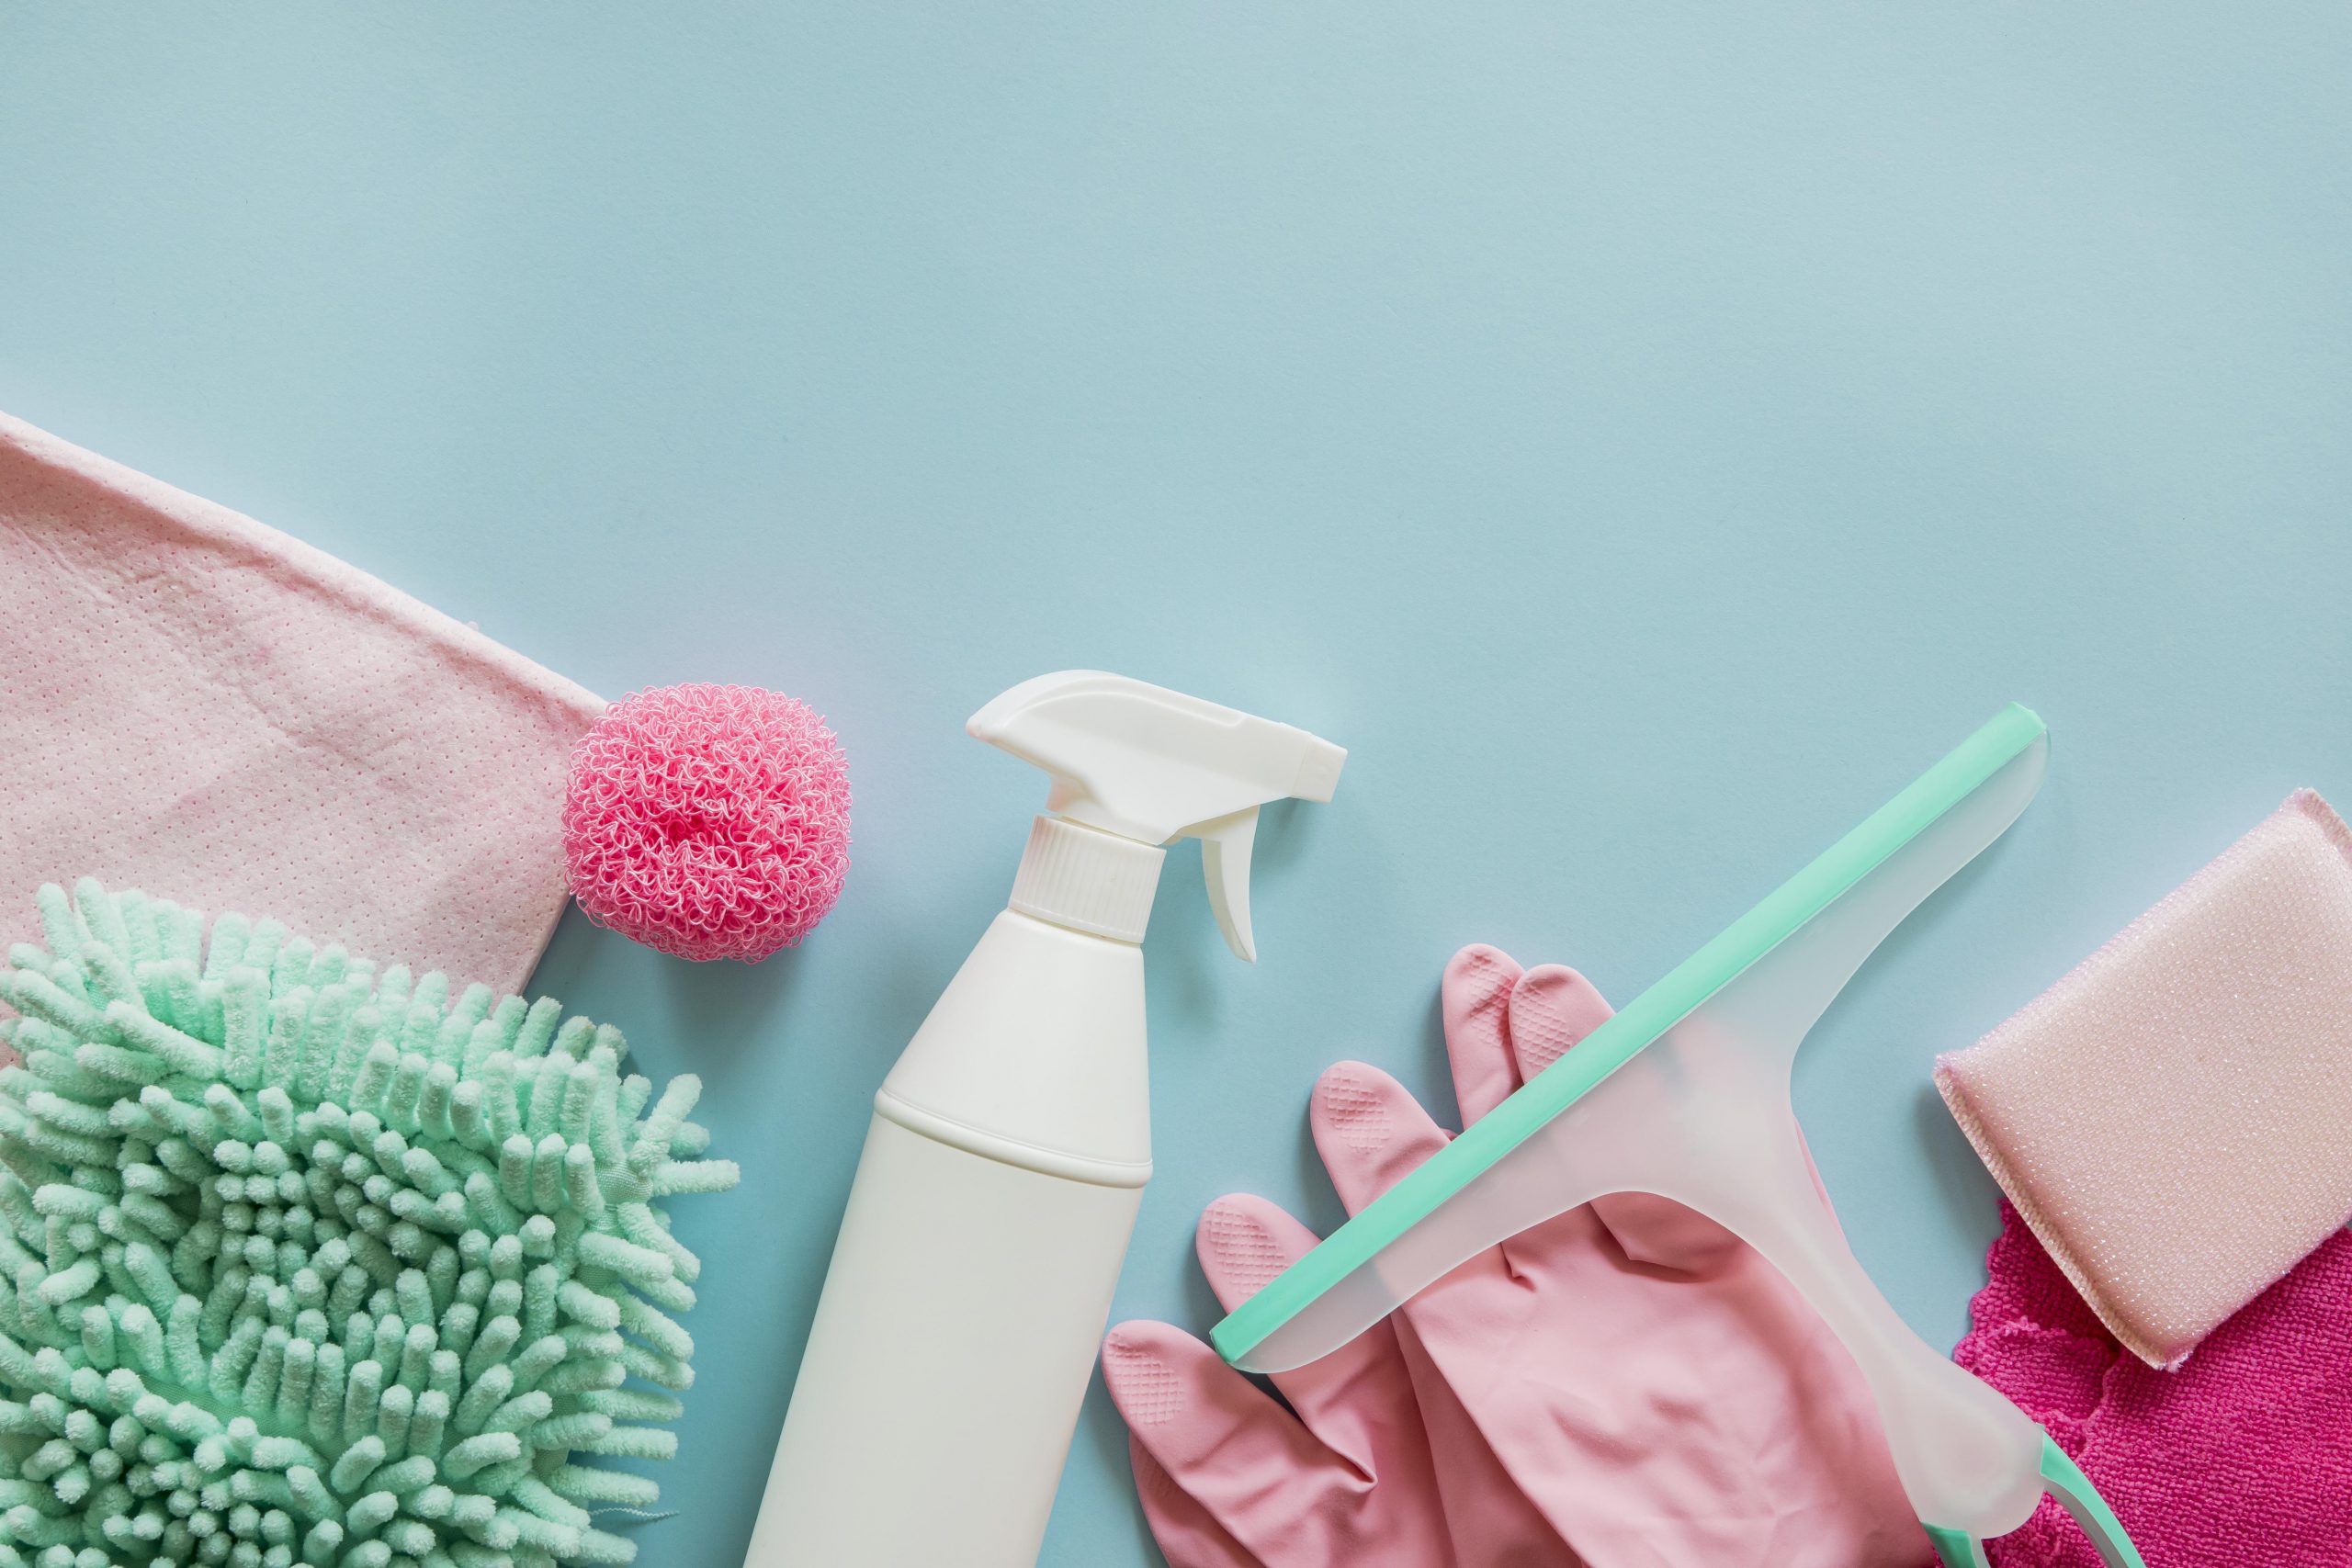 10 secrets to cut your cleaning time in
half